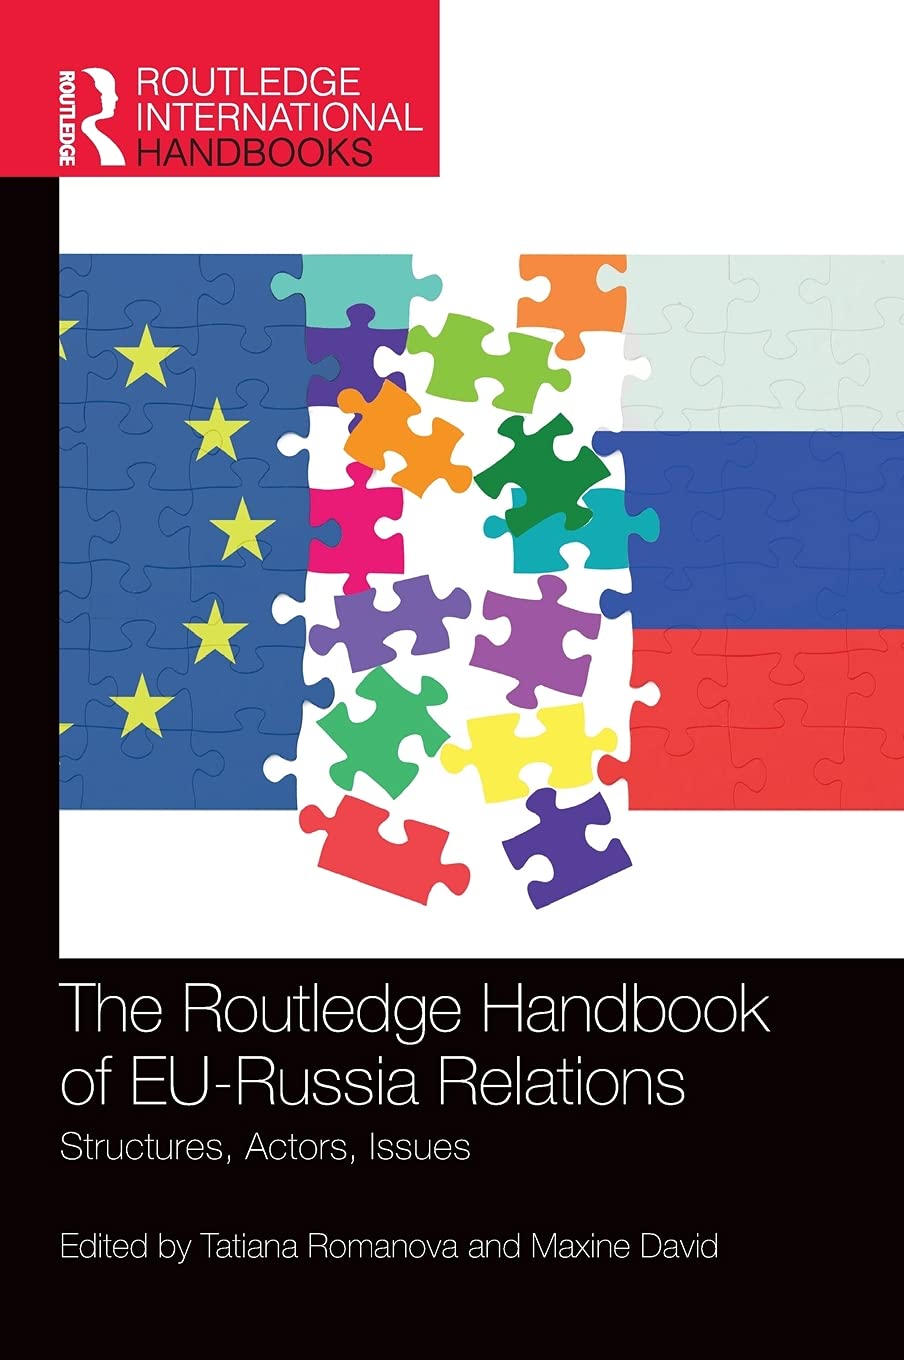 EU-Russia-US relations. Diverging visions on European security